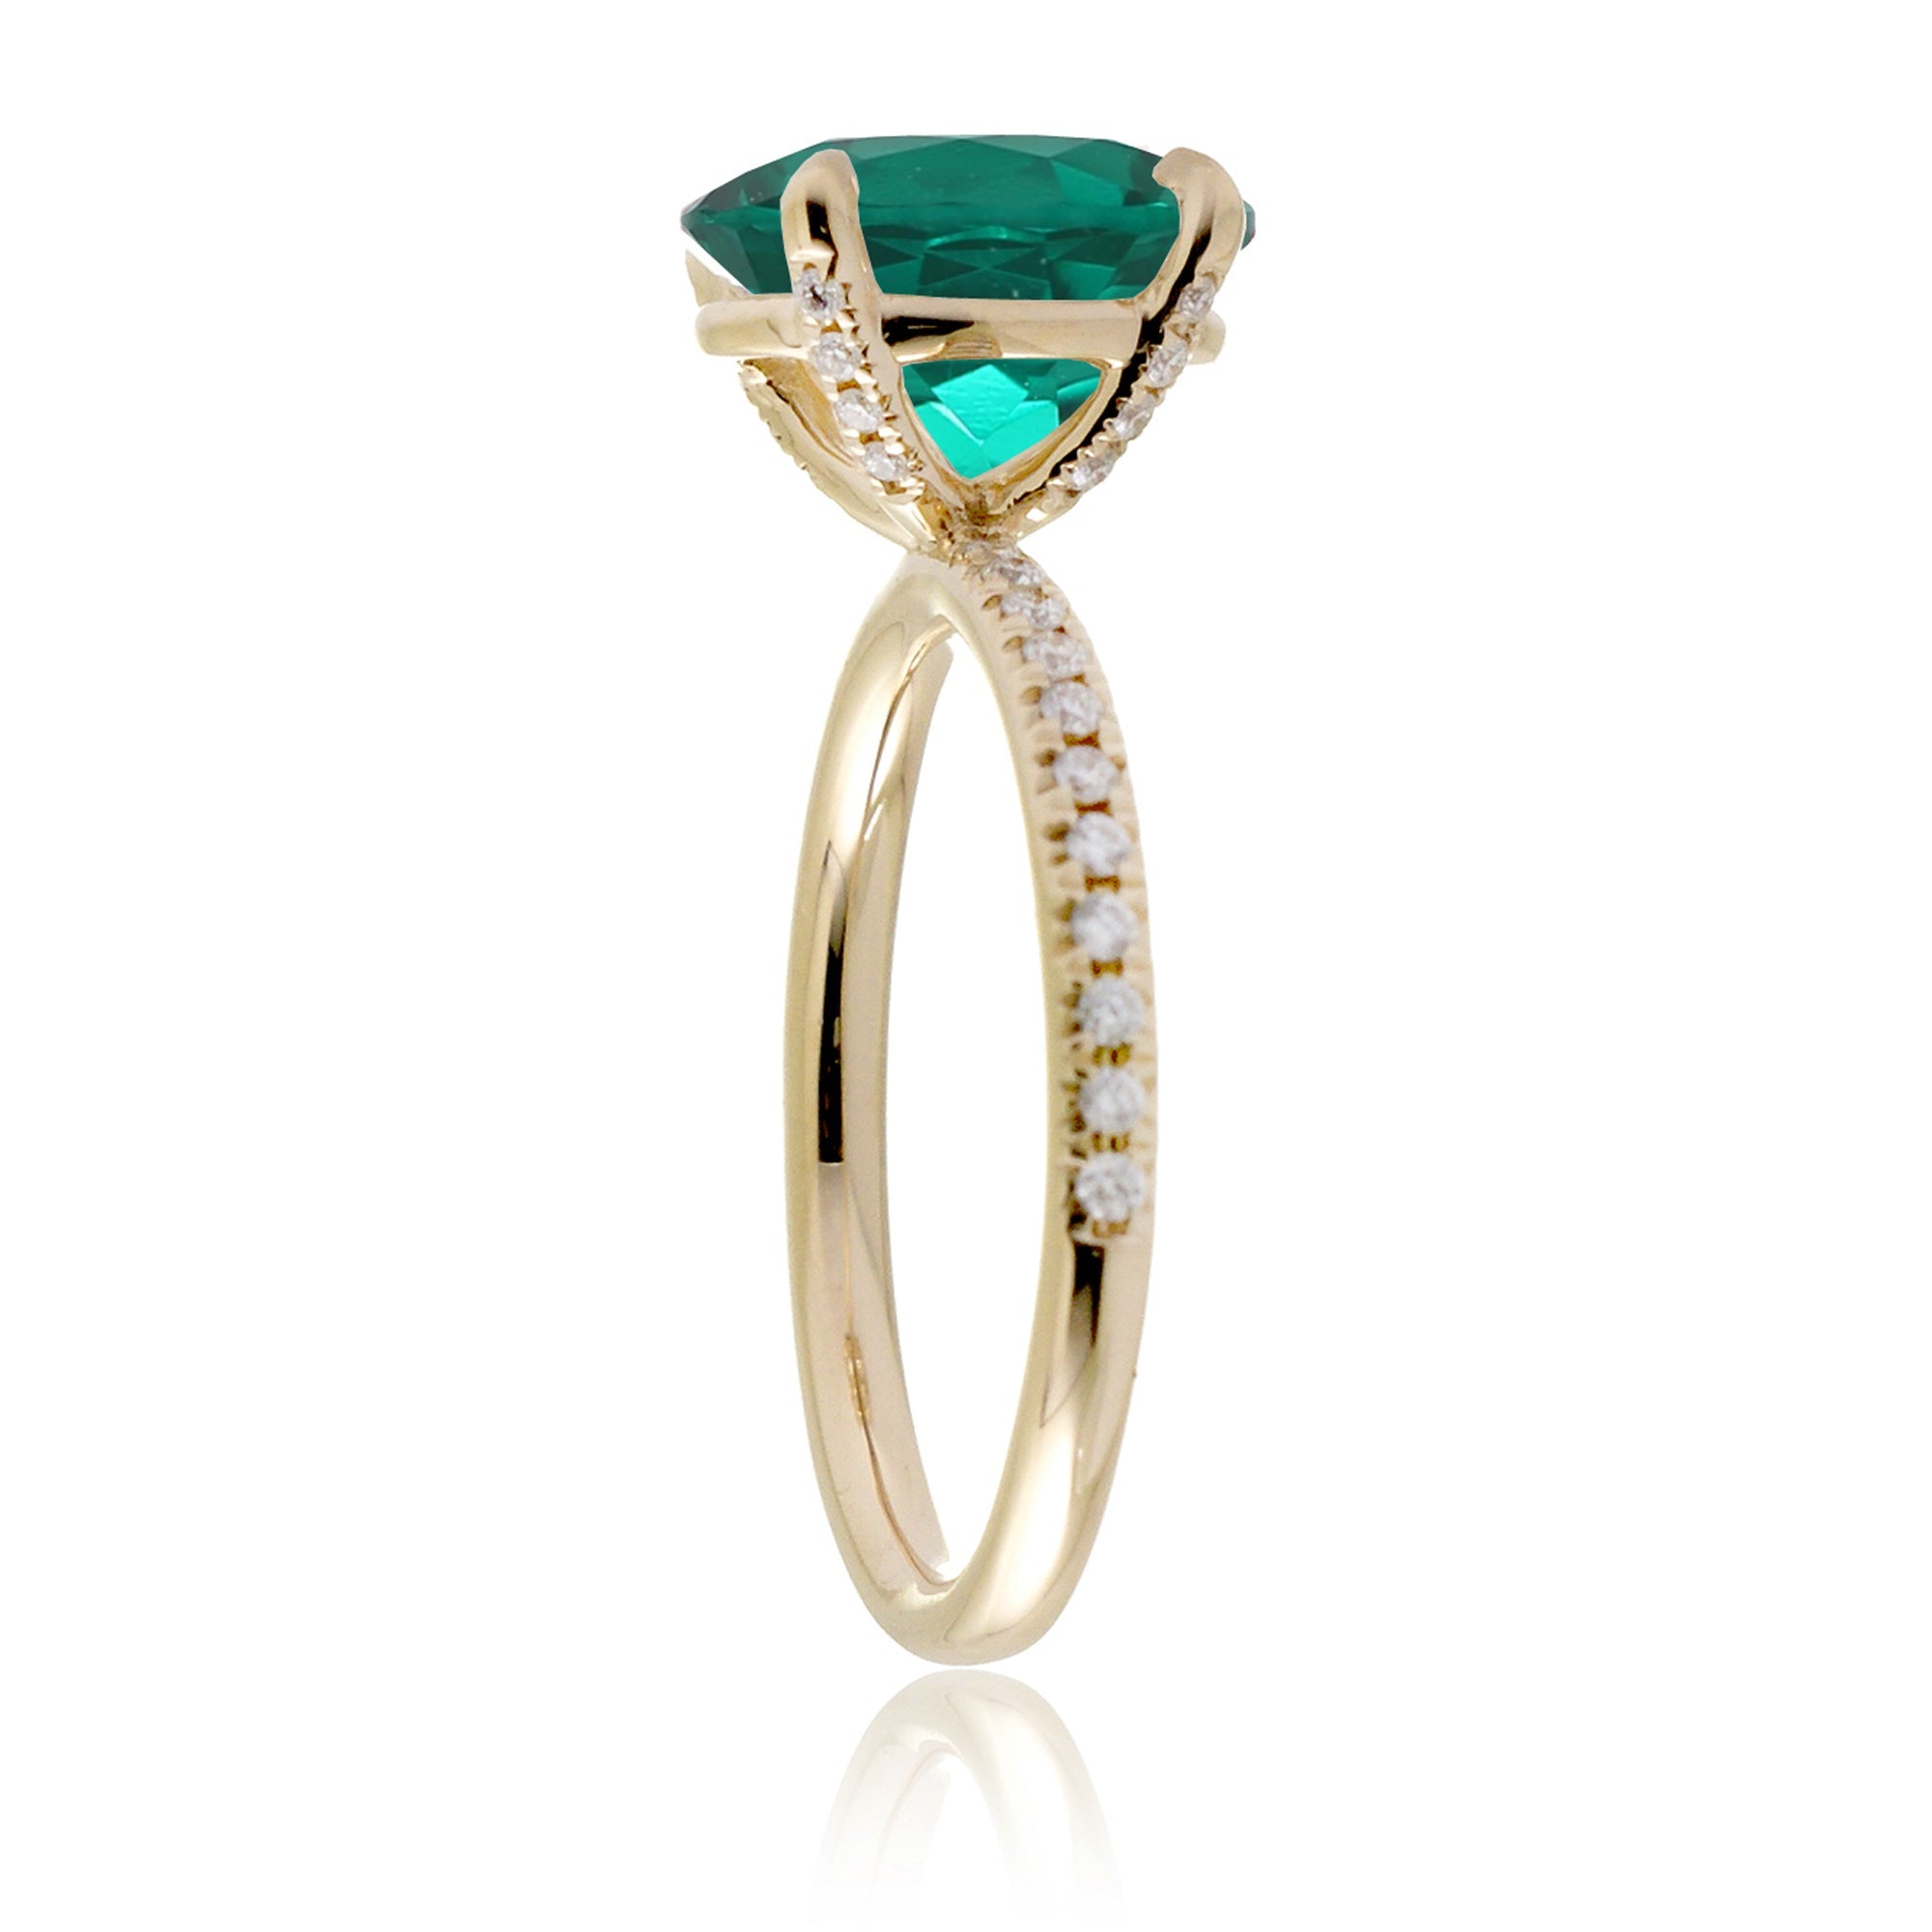 Oval green emerald diamond band engagement ring yellow gold - the Ava